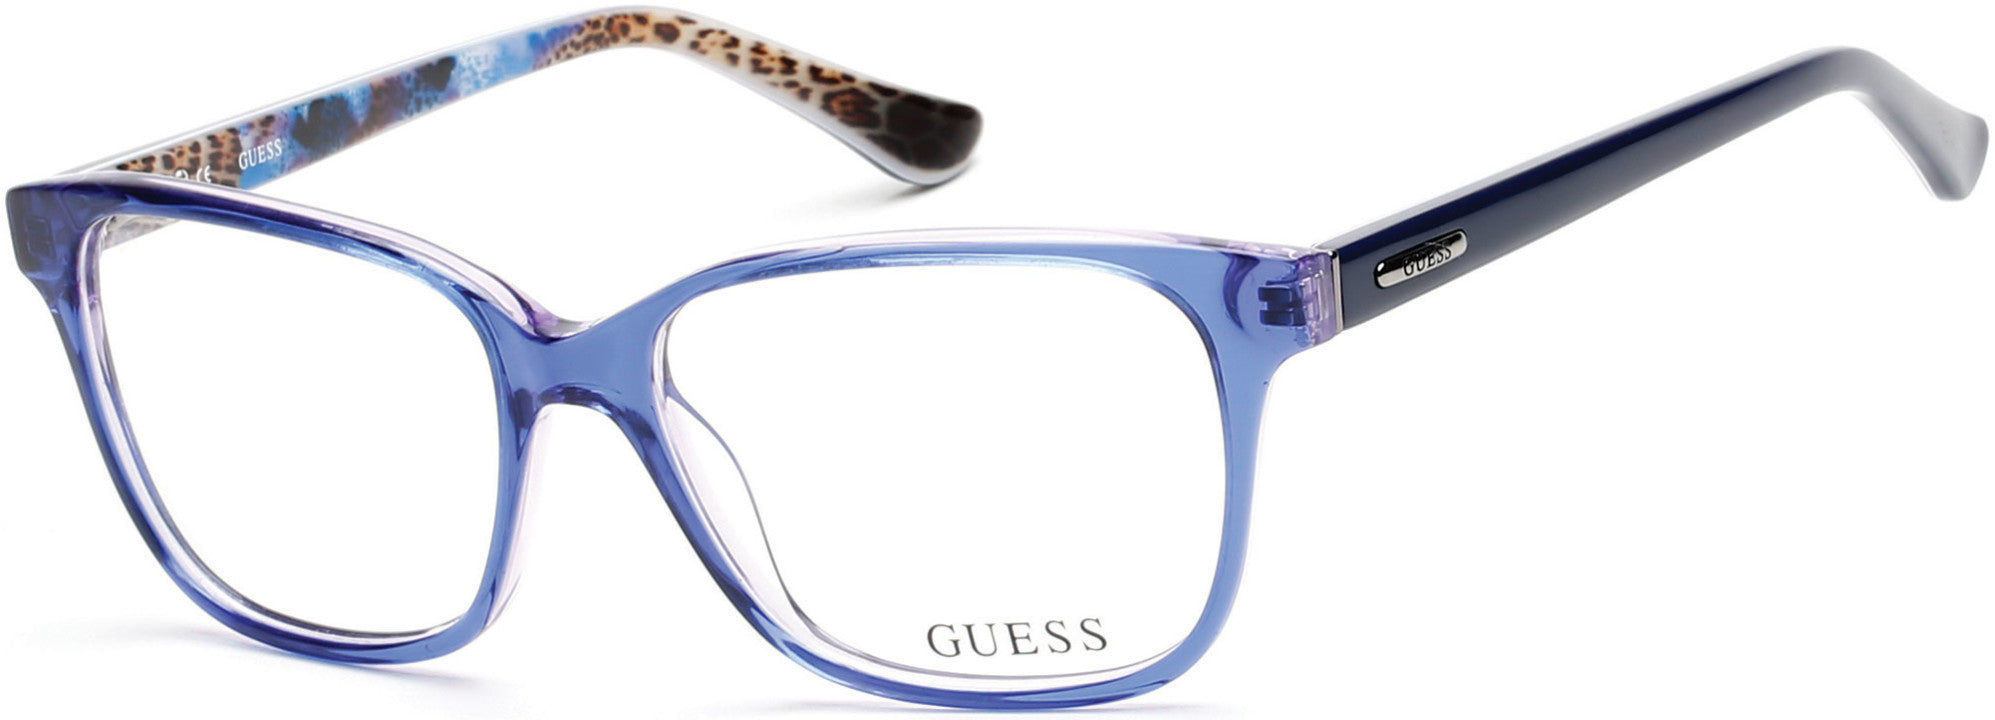 Guess GU2506 Square Eyeglasses 092-092 - Blue/other